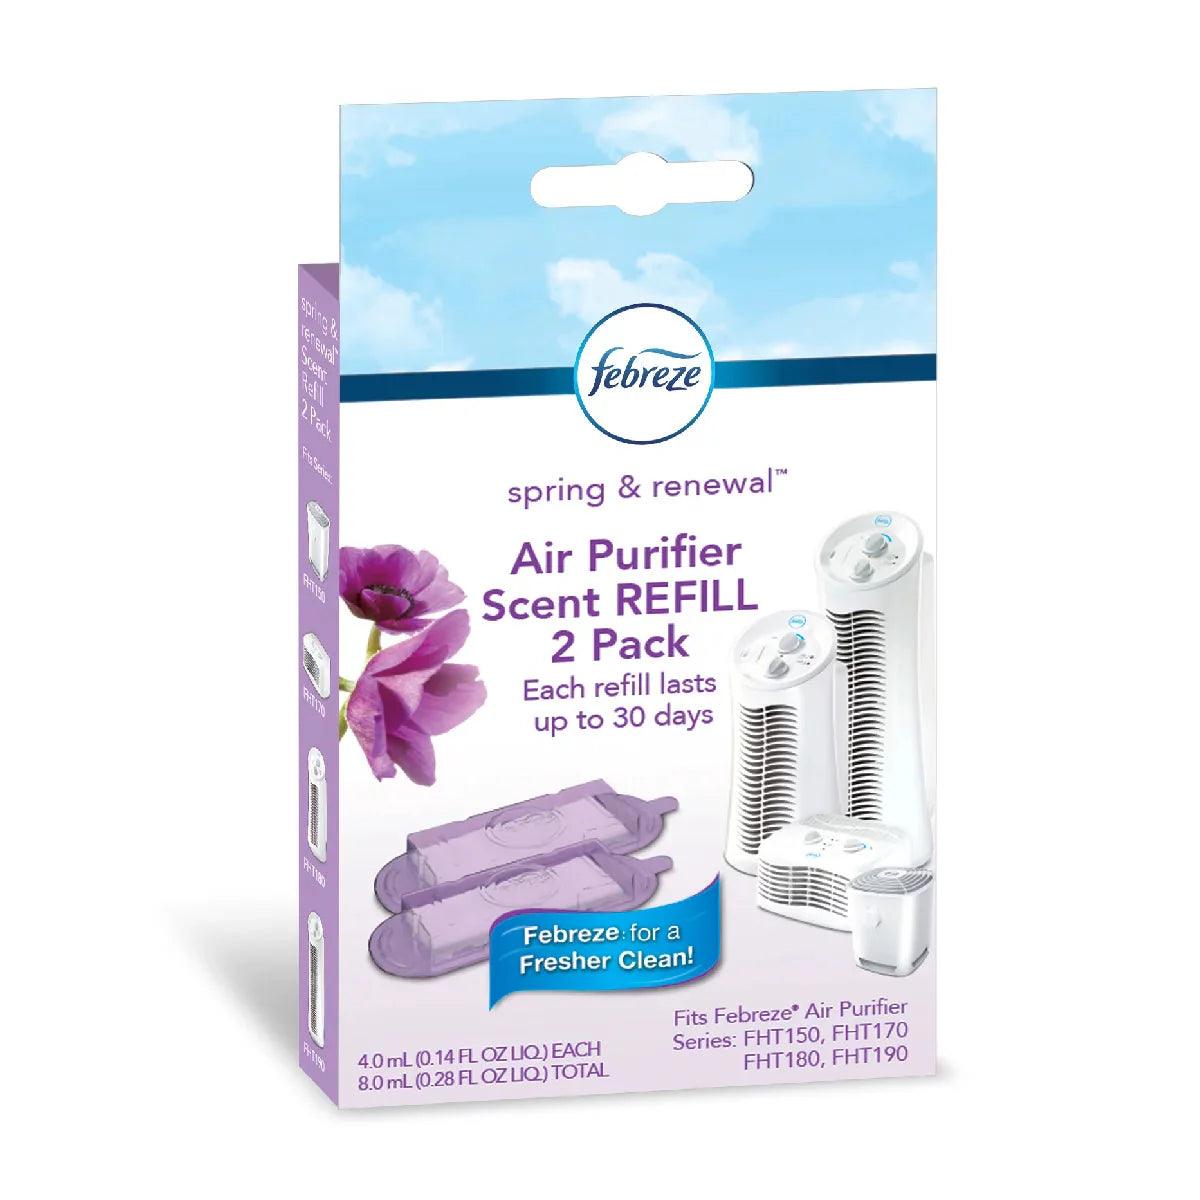 Wholesale prices with free shipping all over United States Febreze Spring and Renewal Air Purifier Refill Scent Cartridge, FRF102P - Steven Deals